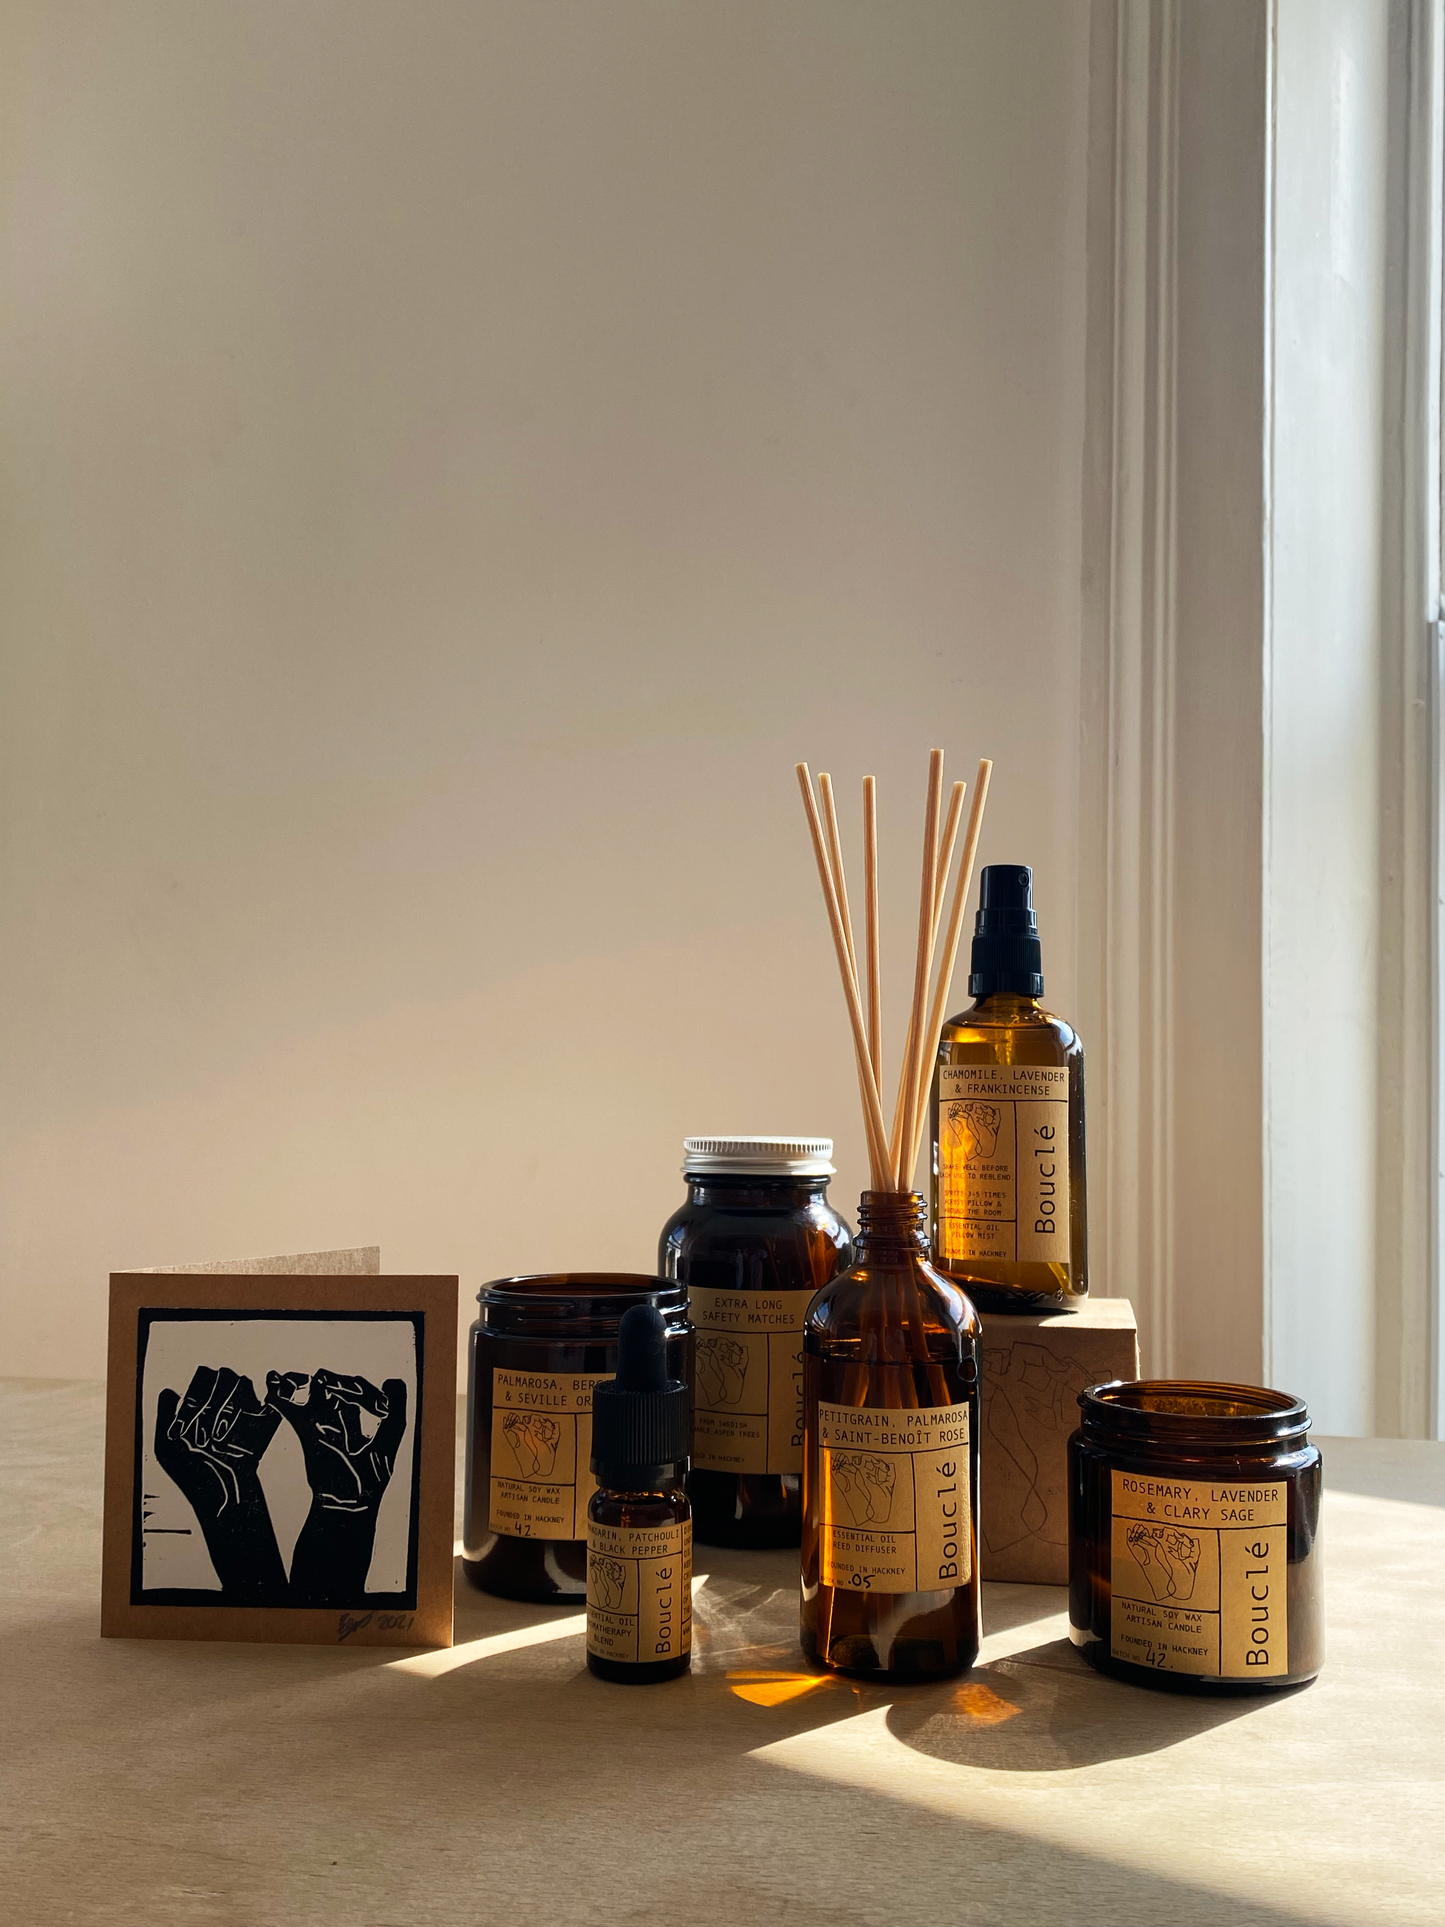 Selection of hand made Bouclé natural home fragrance products, including soy wax candles, rattan reed diffusers and essential oils